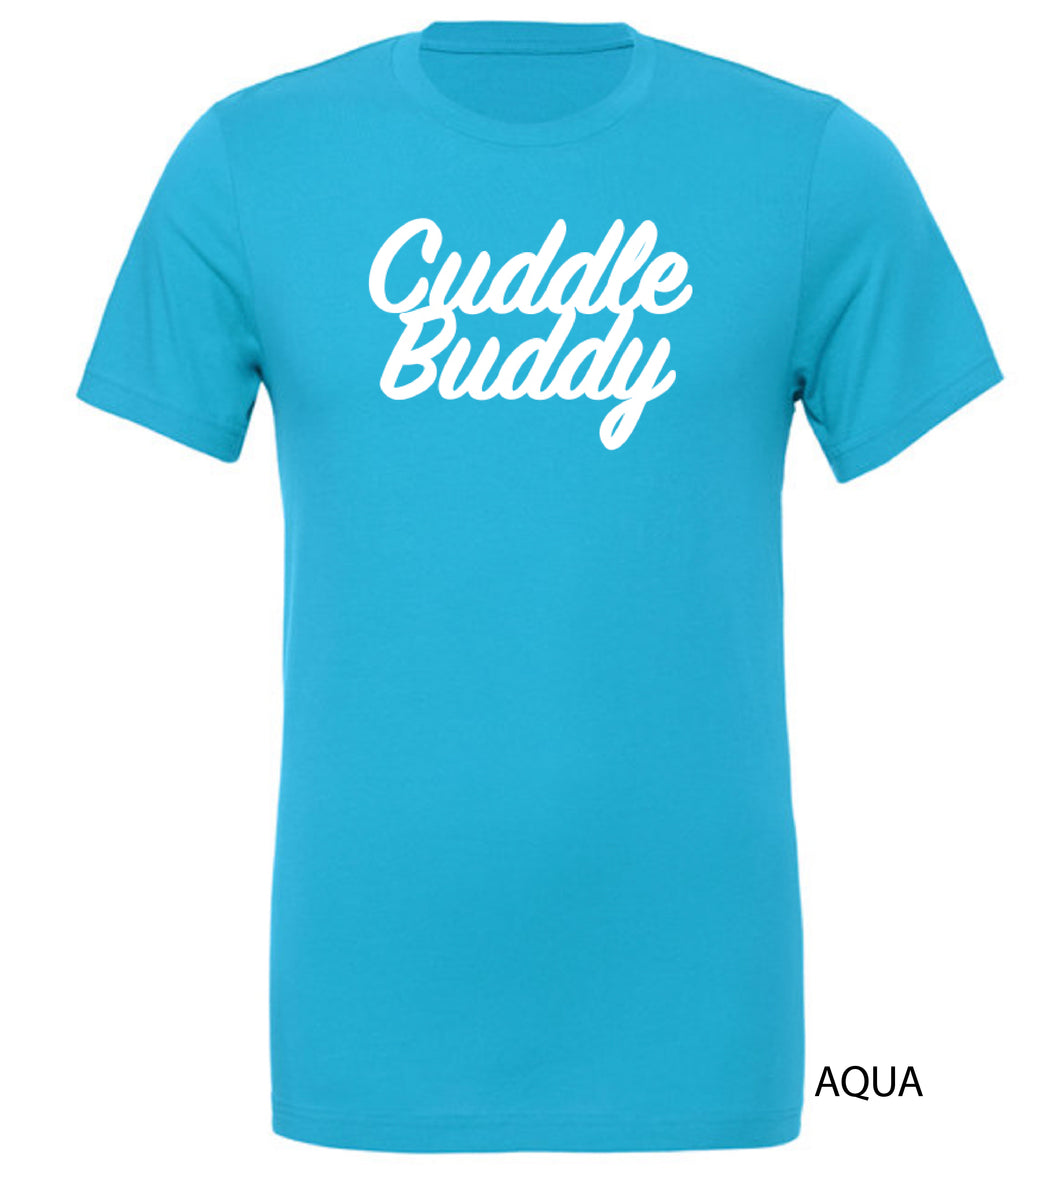 CUDDLE BUDDY Tee - Various Colors